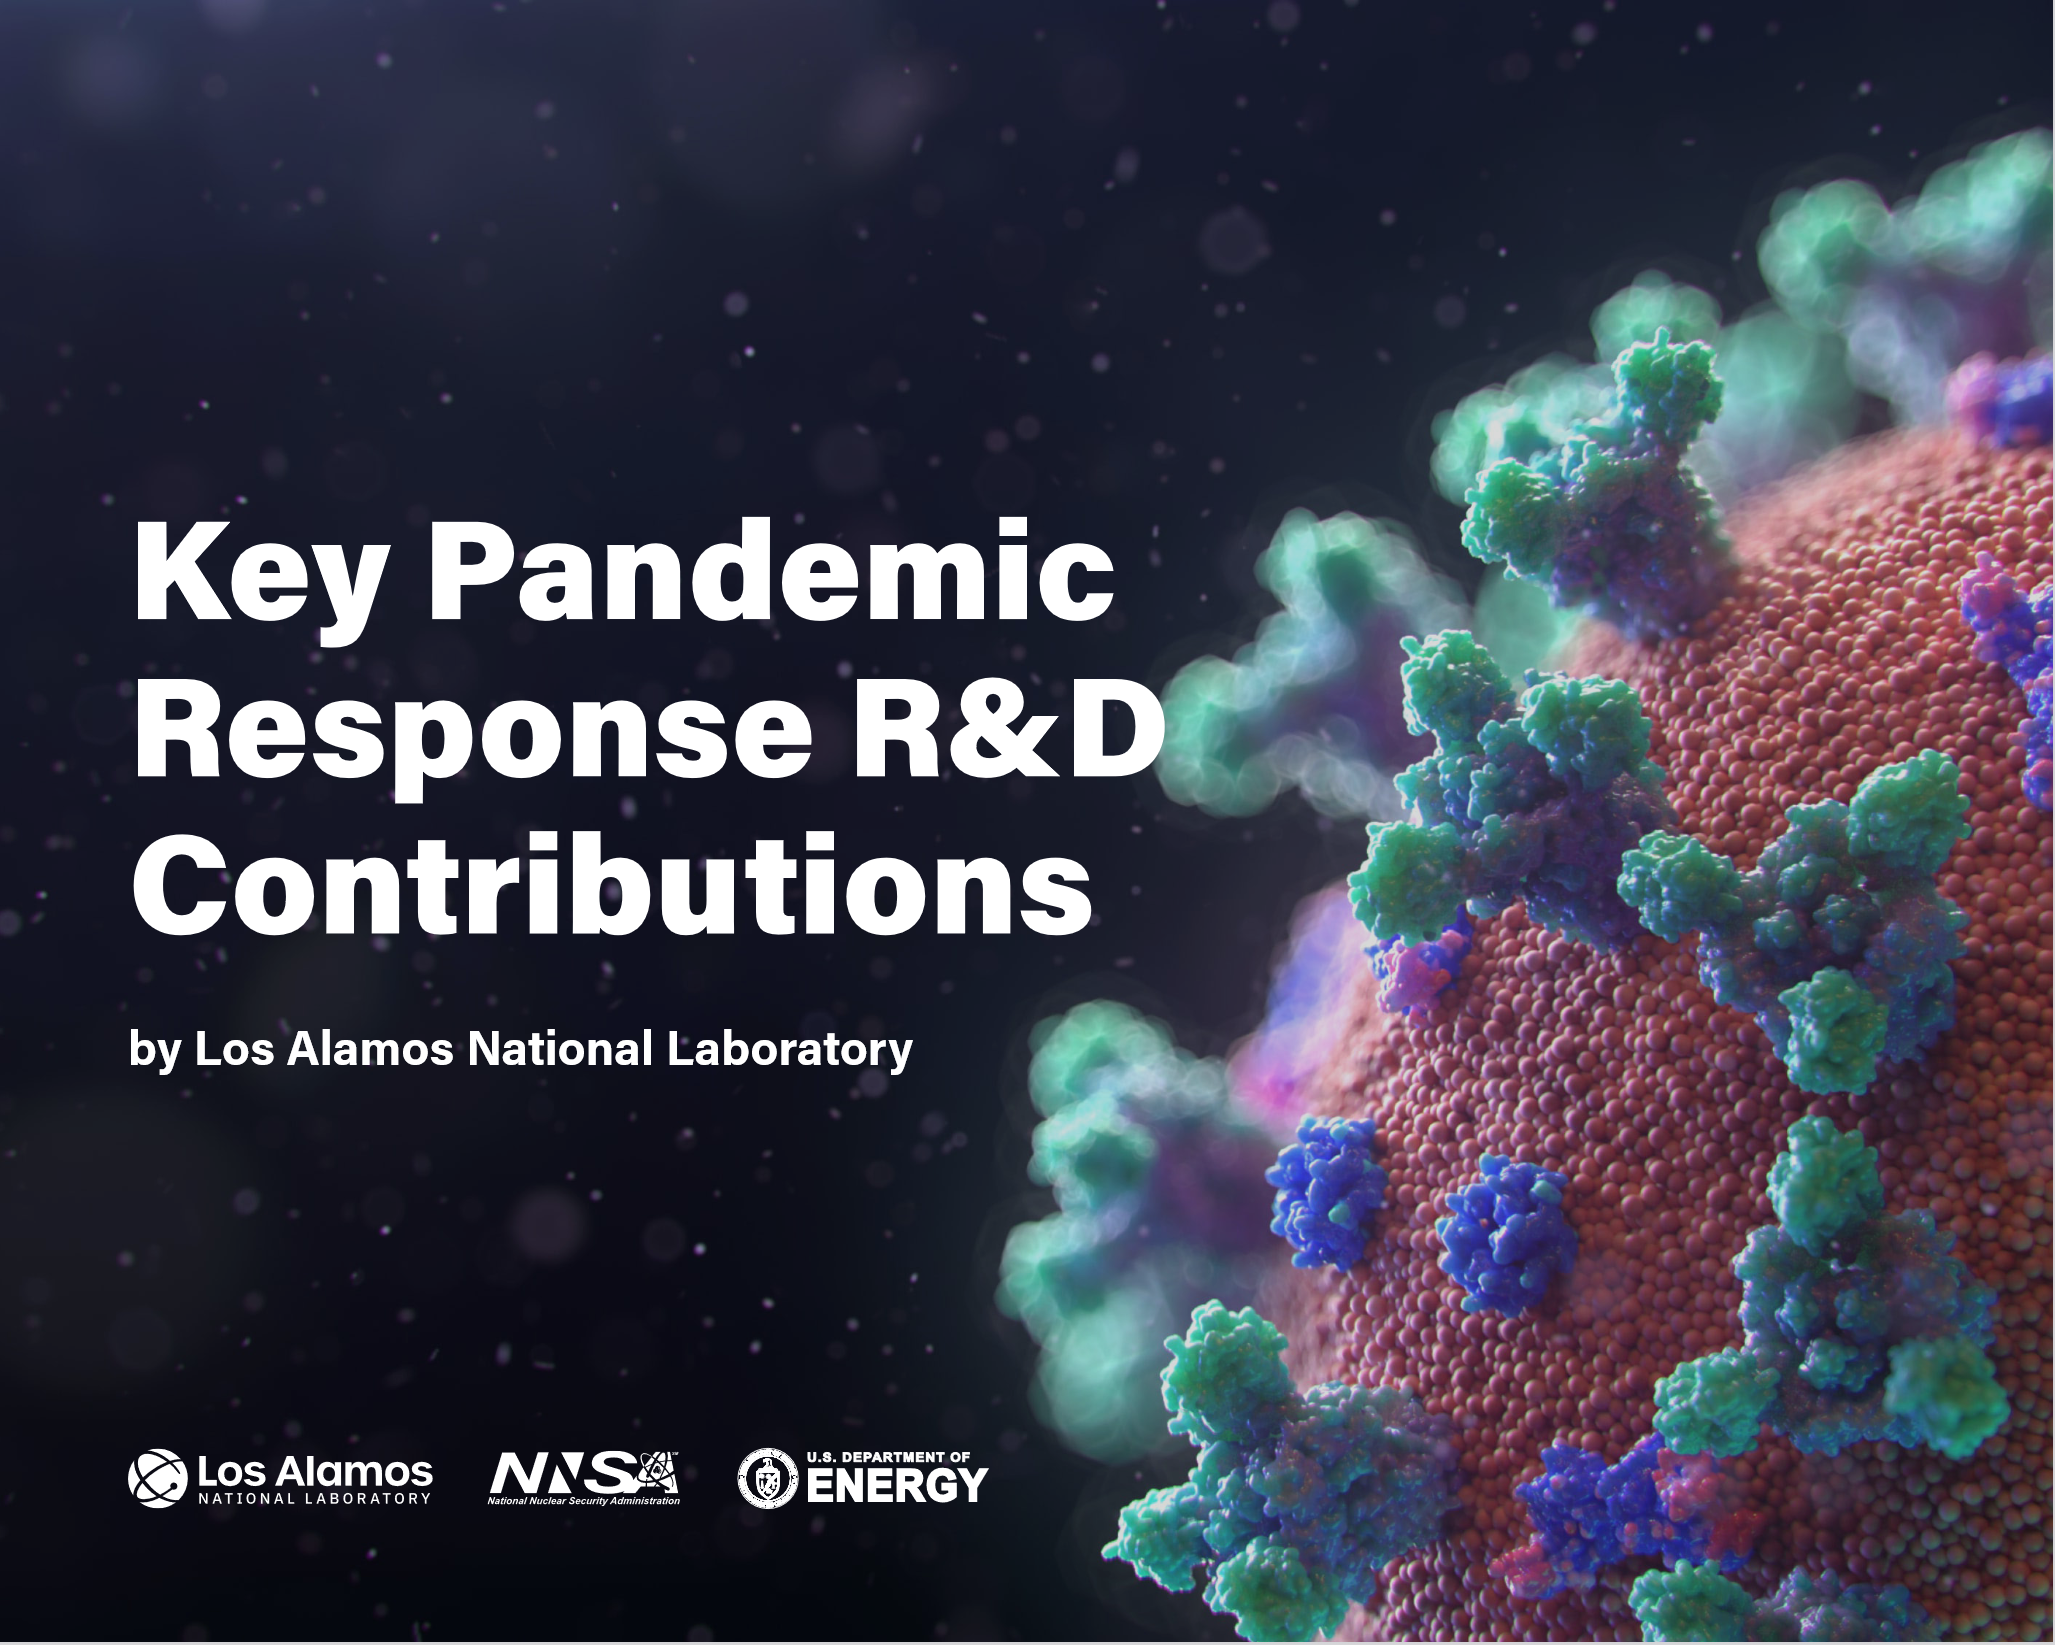 The “Key Pandemic Response R&D Contributions” report details Laboratory capabilities bearing on pandemic response